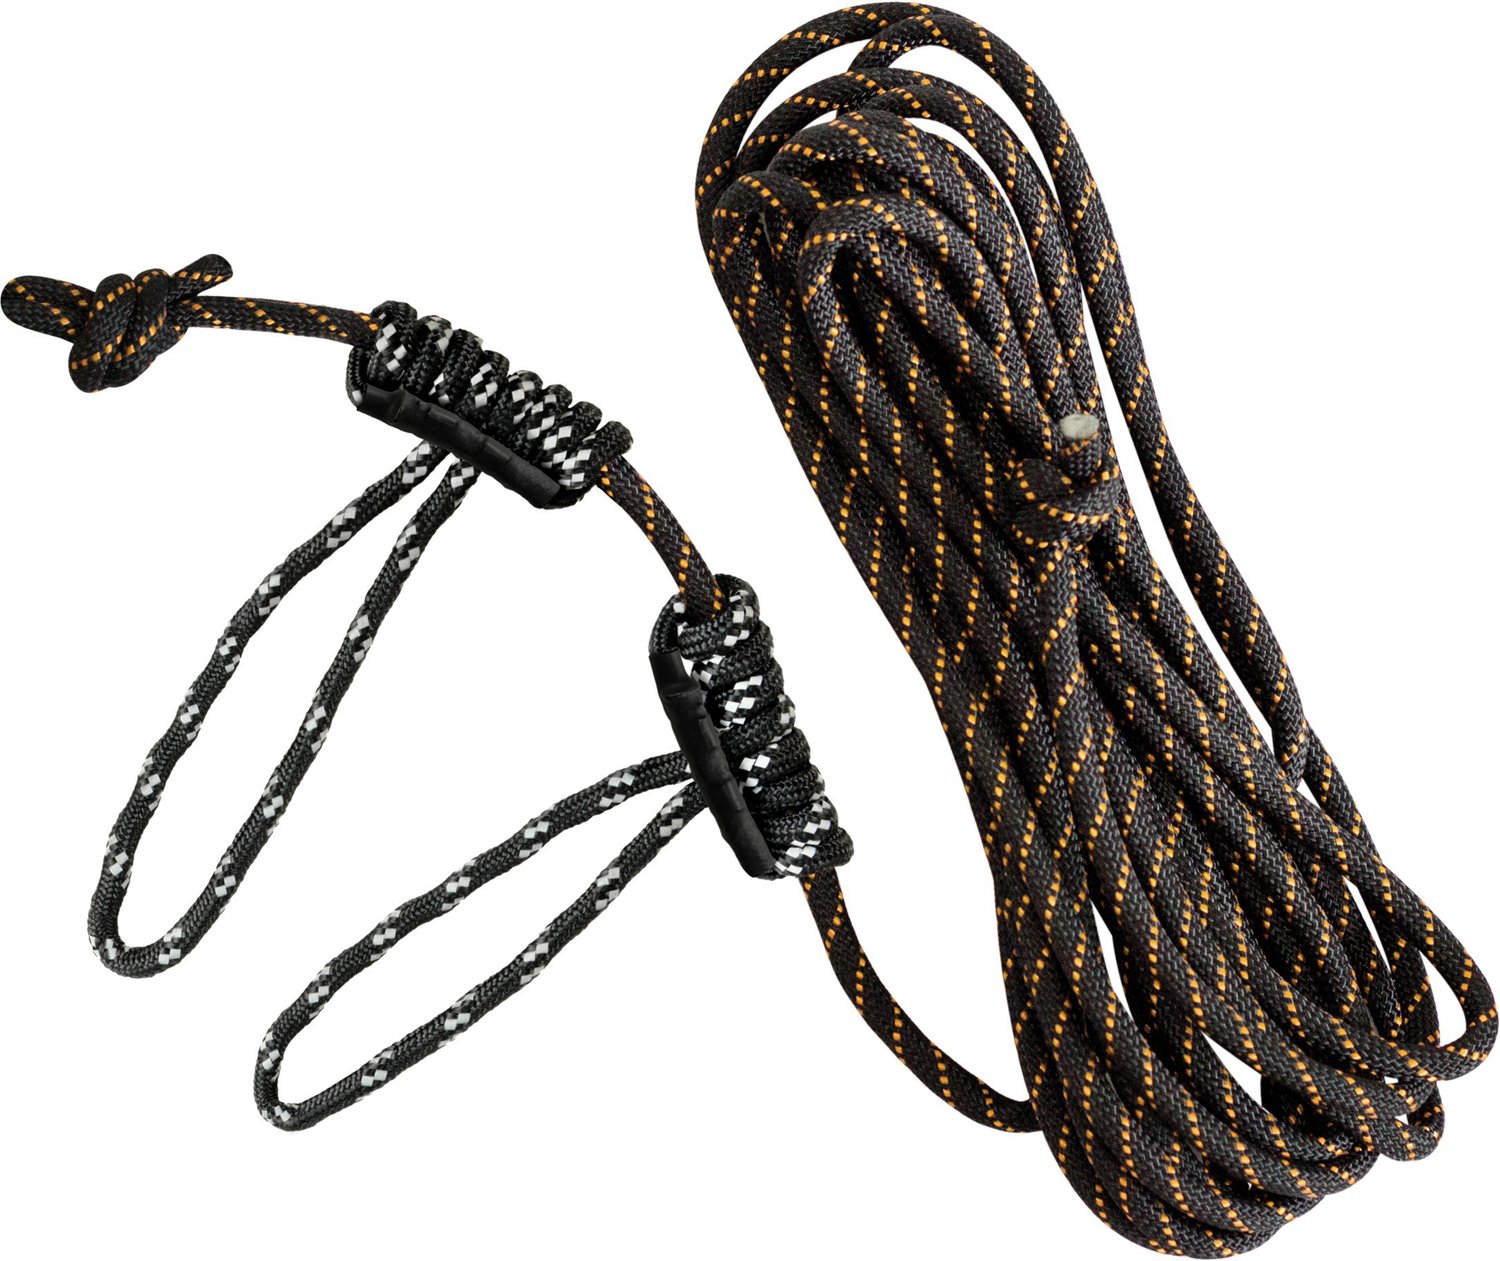 Safety Rope, Nylon Rope, Outdoor Climbing Rope, Climbing Rope